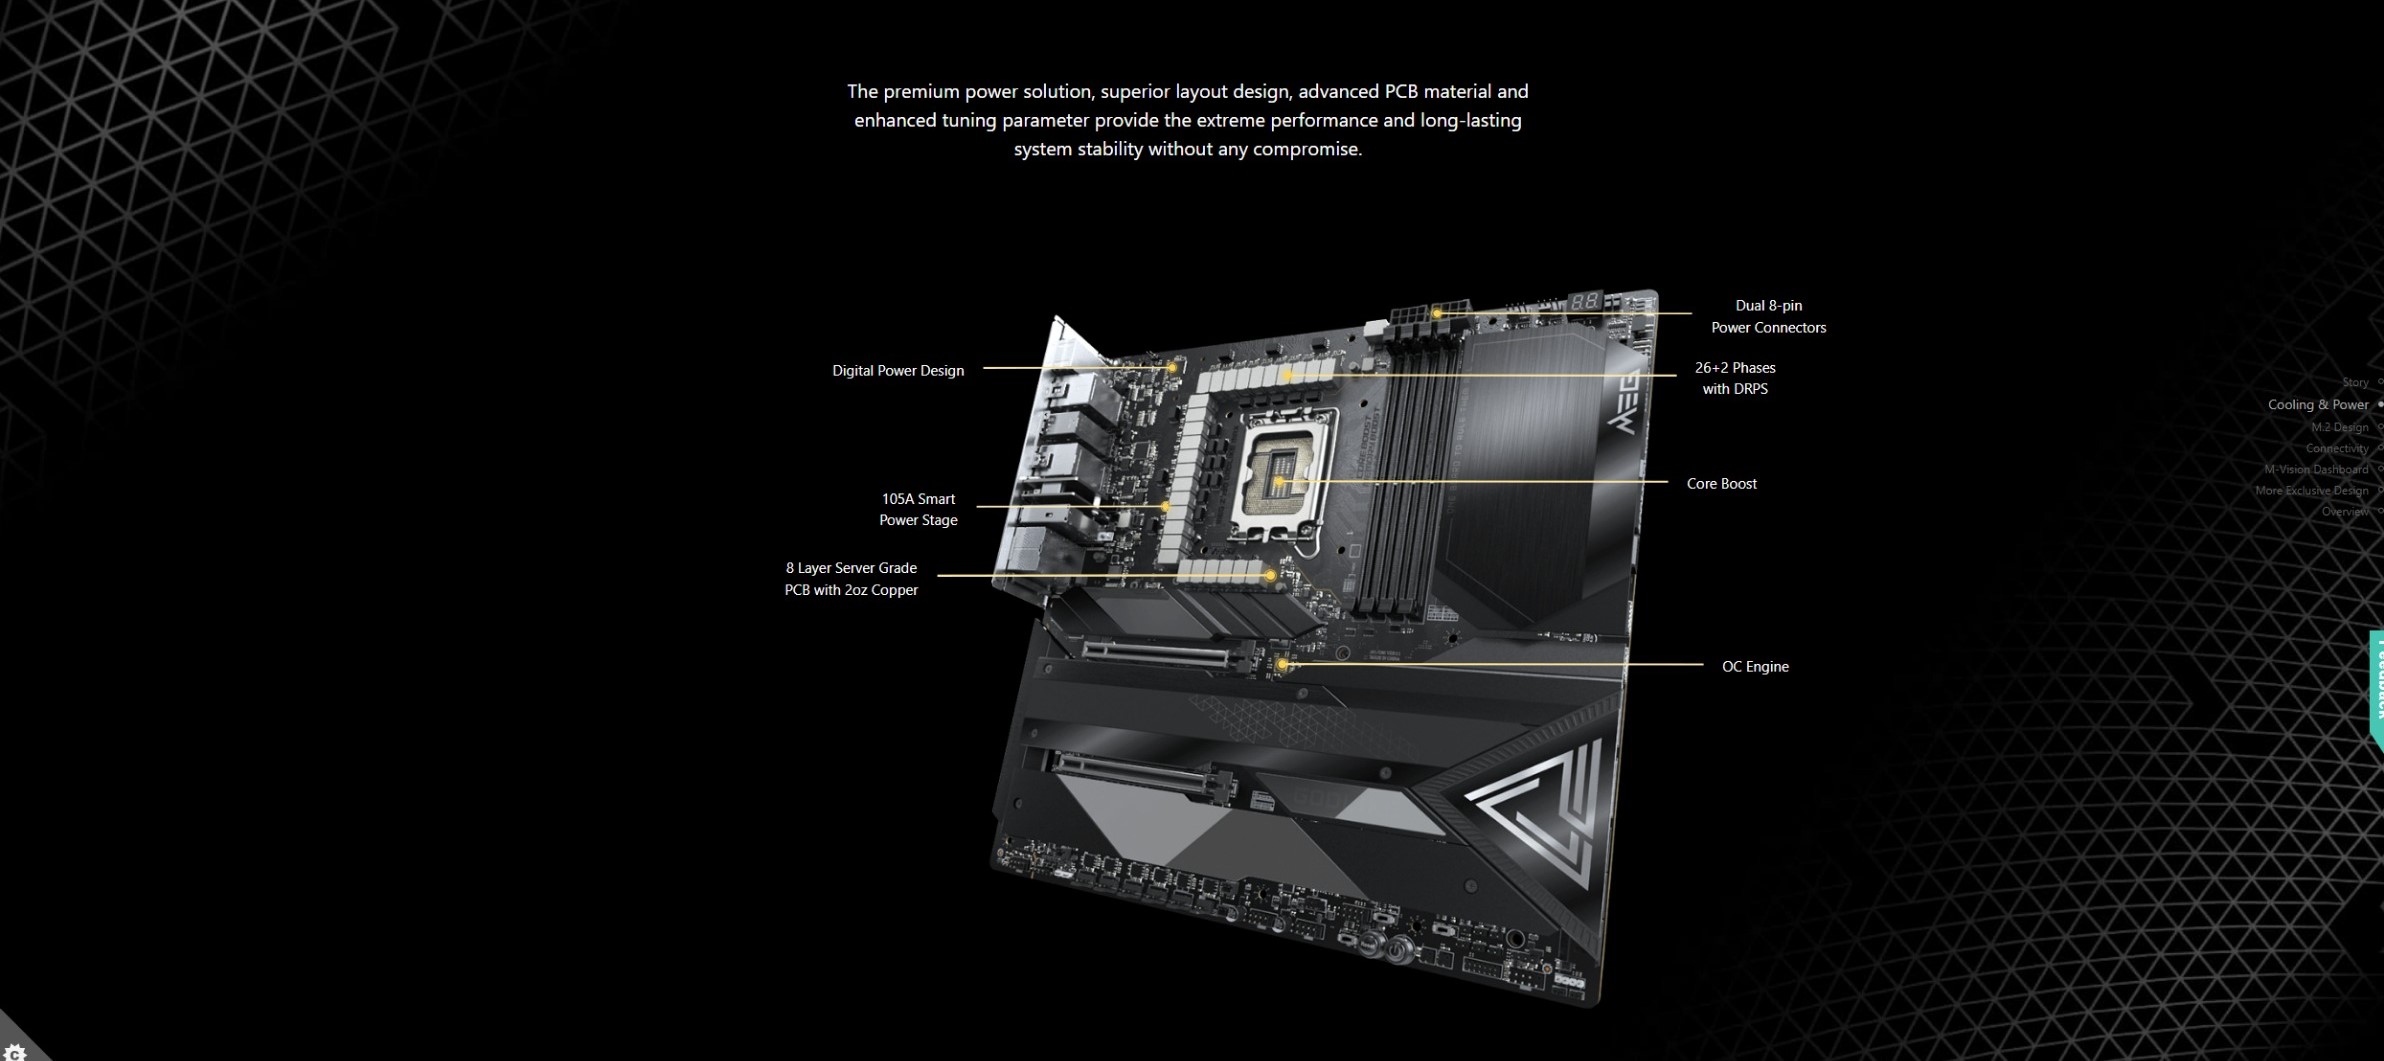 A large marketing image providing additional information about the product MSI MEG Z790 Godlike Max LGA1700 eATX Desktop Motherboard - Additional alt info not provided